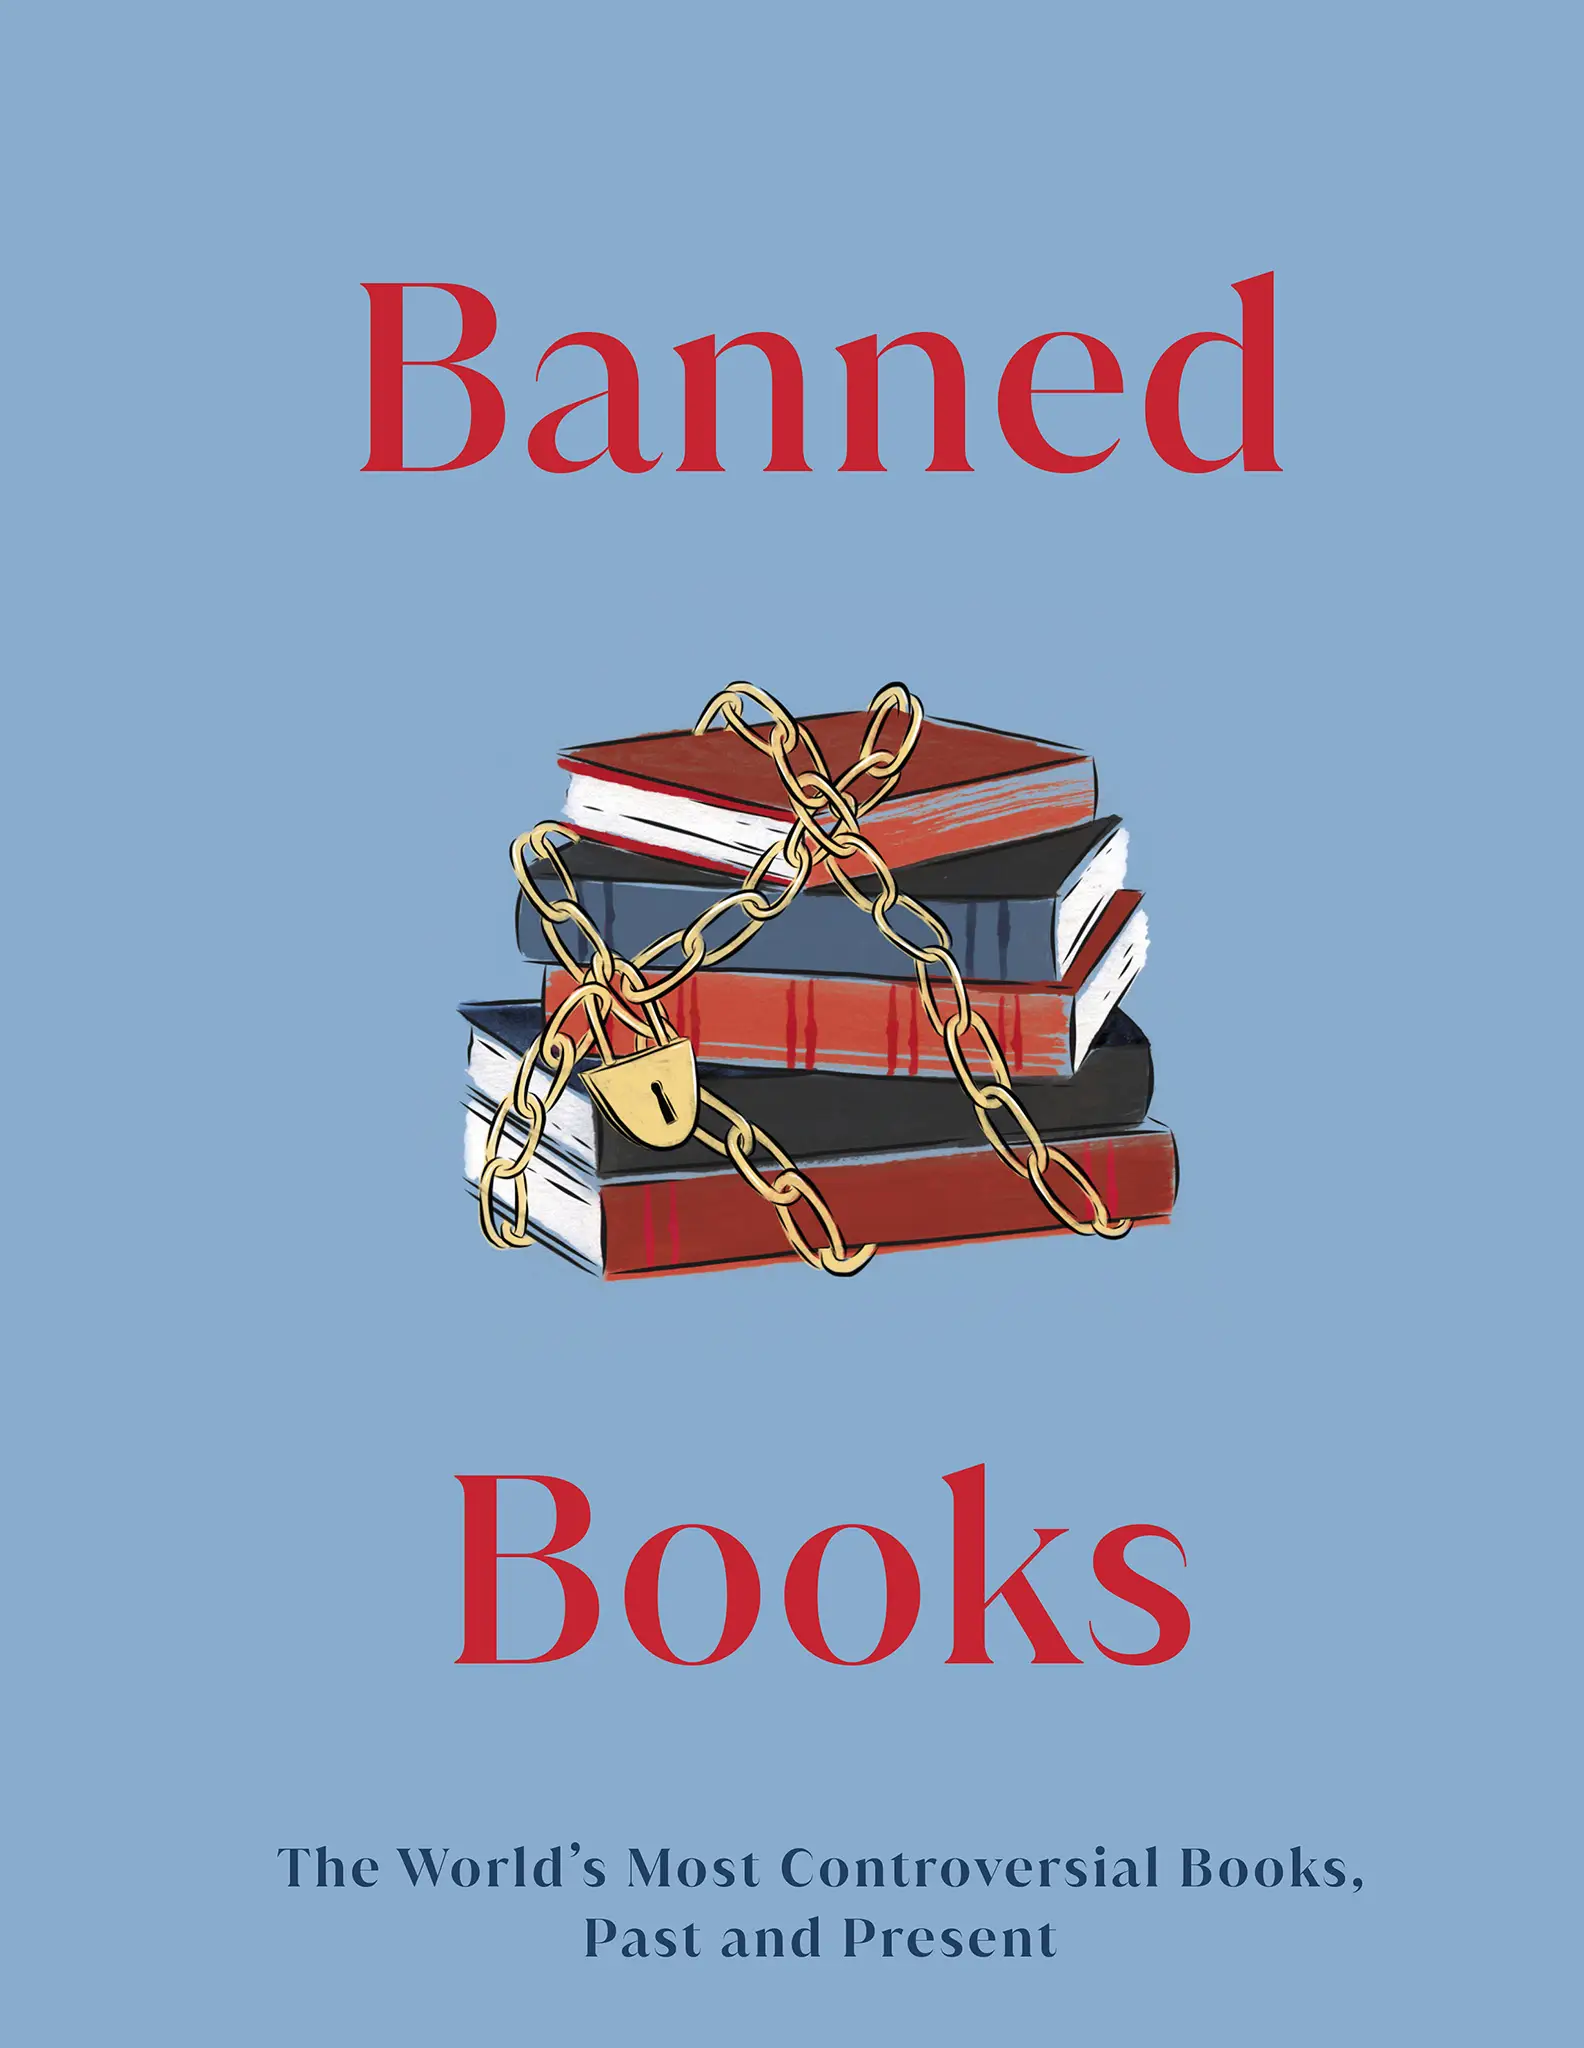 Banned Books The World's Most Controversial Books, Past and Present